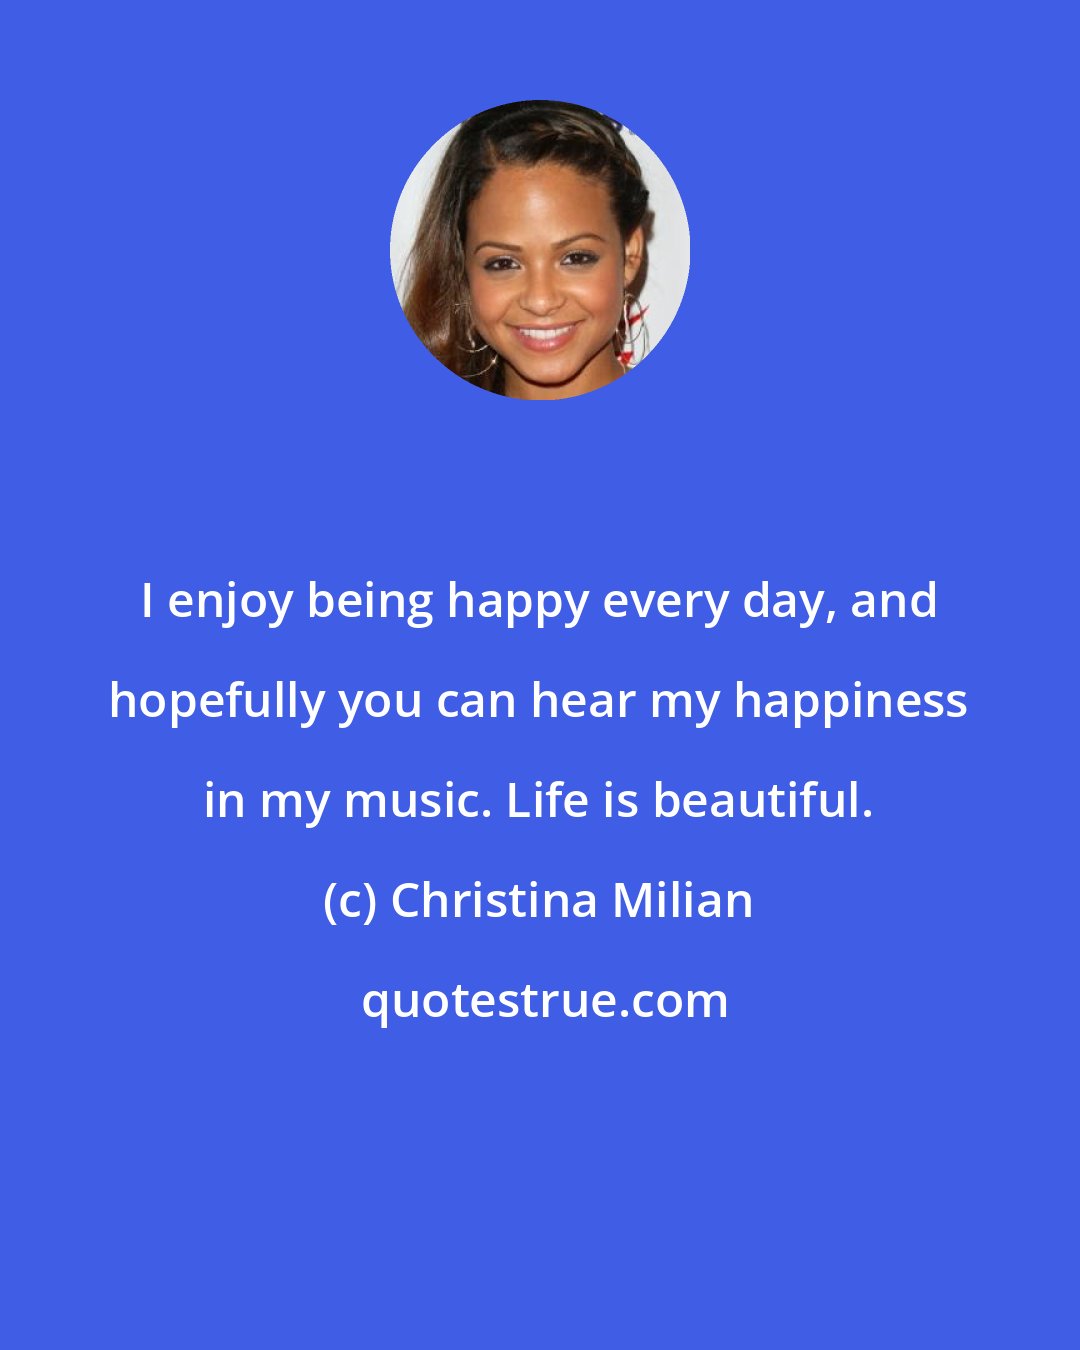 Christina Milian: I enjoy being happy every day, and hopefully you can hear my happiness in my music. Life is beautiful.